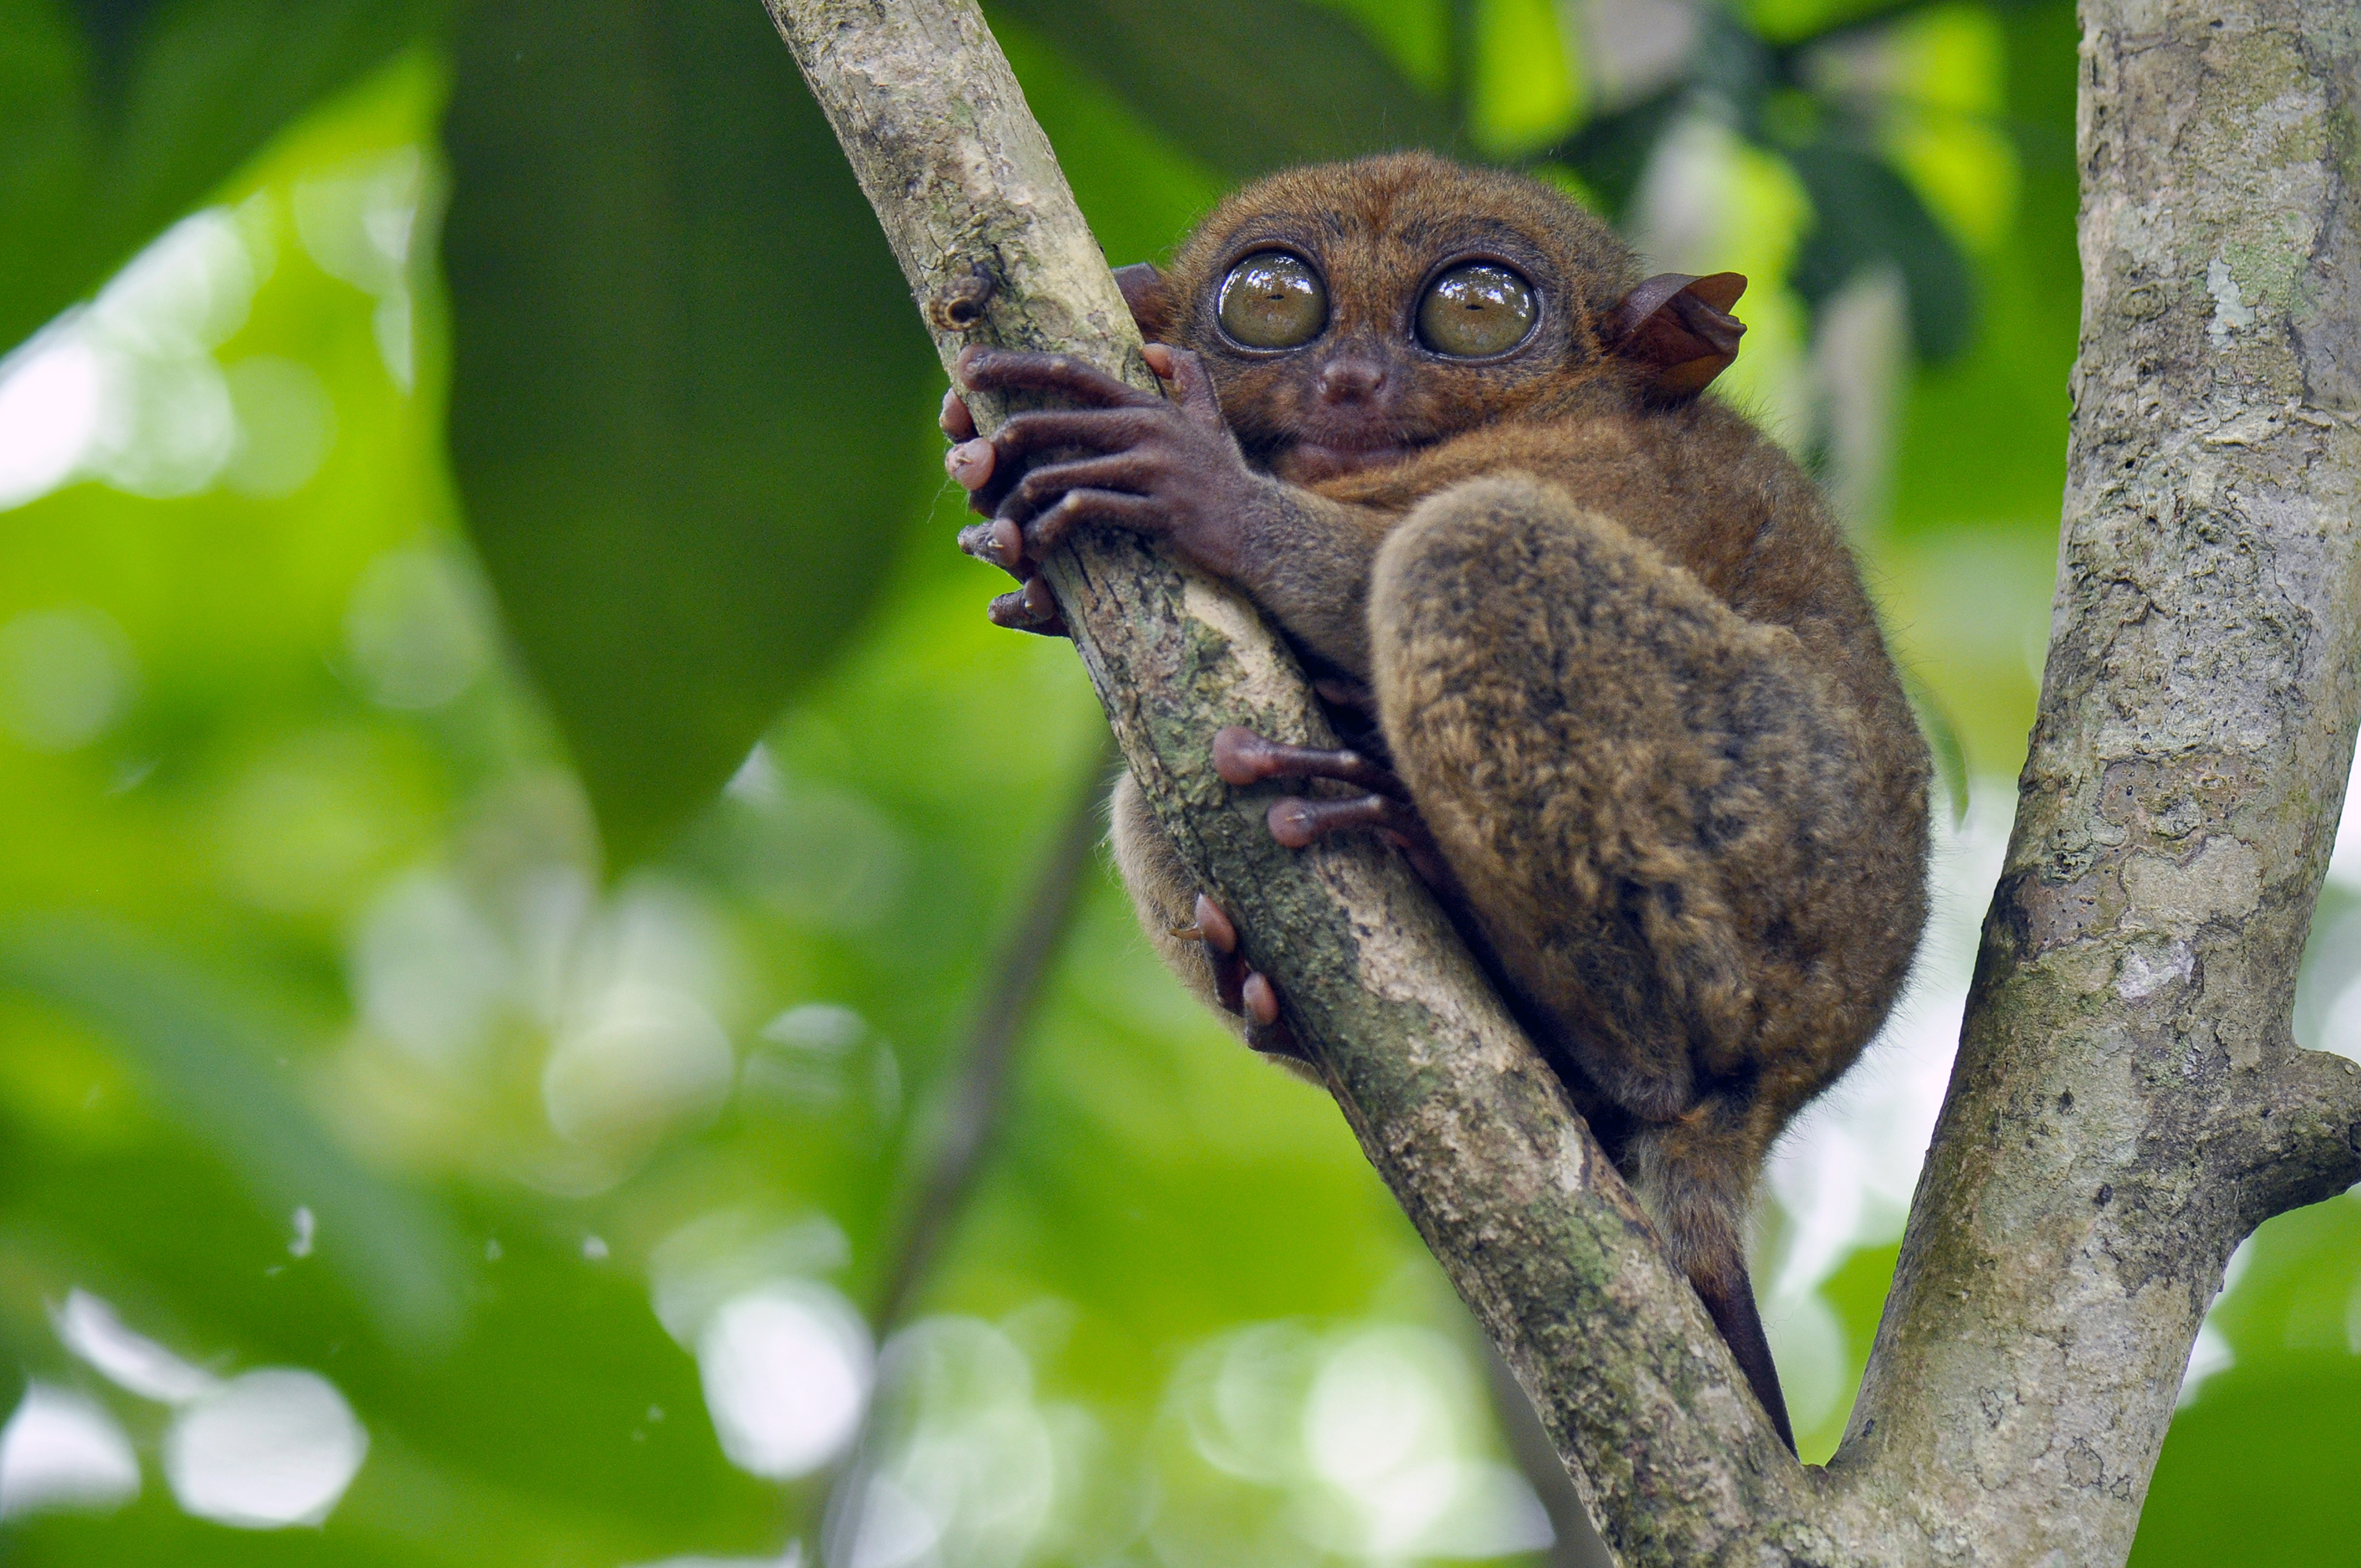 A tarsier in the Tarsier Conservation Area in Bohol